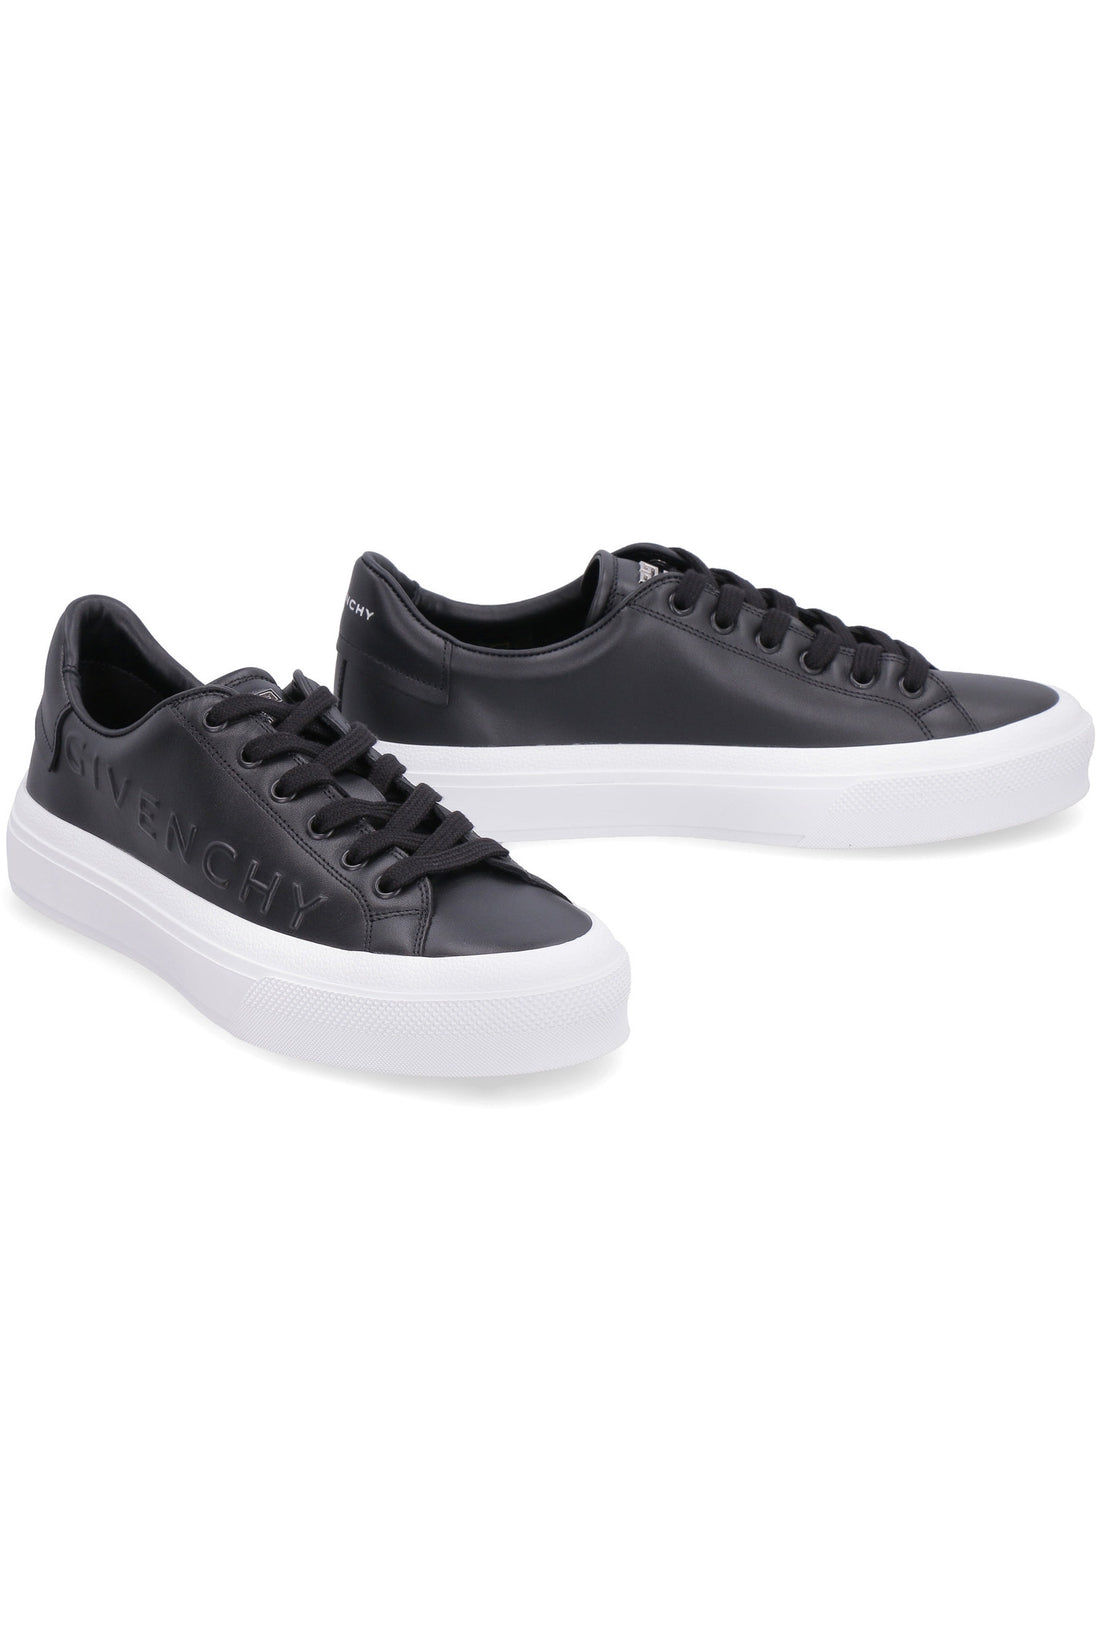 Givenchy-OUTLET-SALE-City Sport leather low-top sneakers-ARCHIVIST